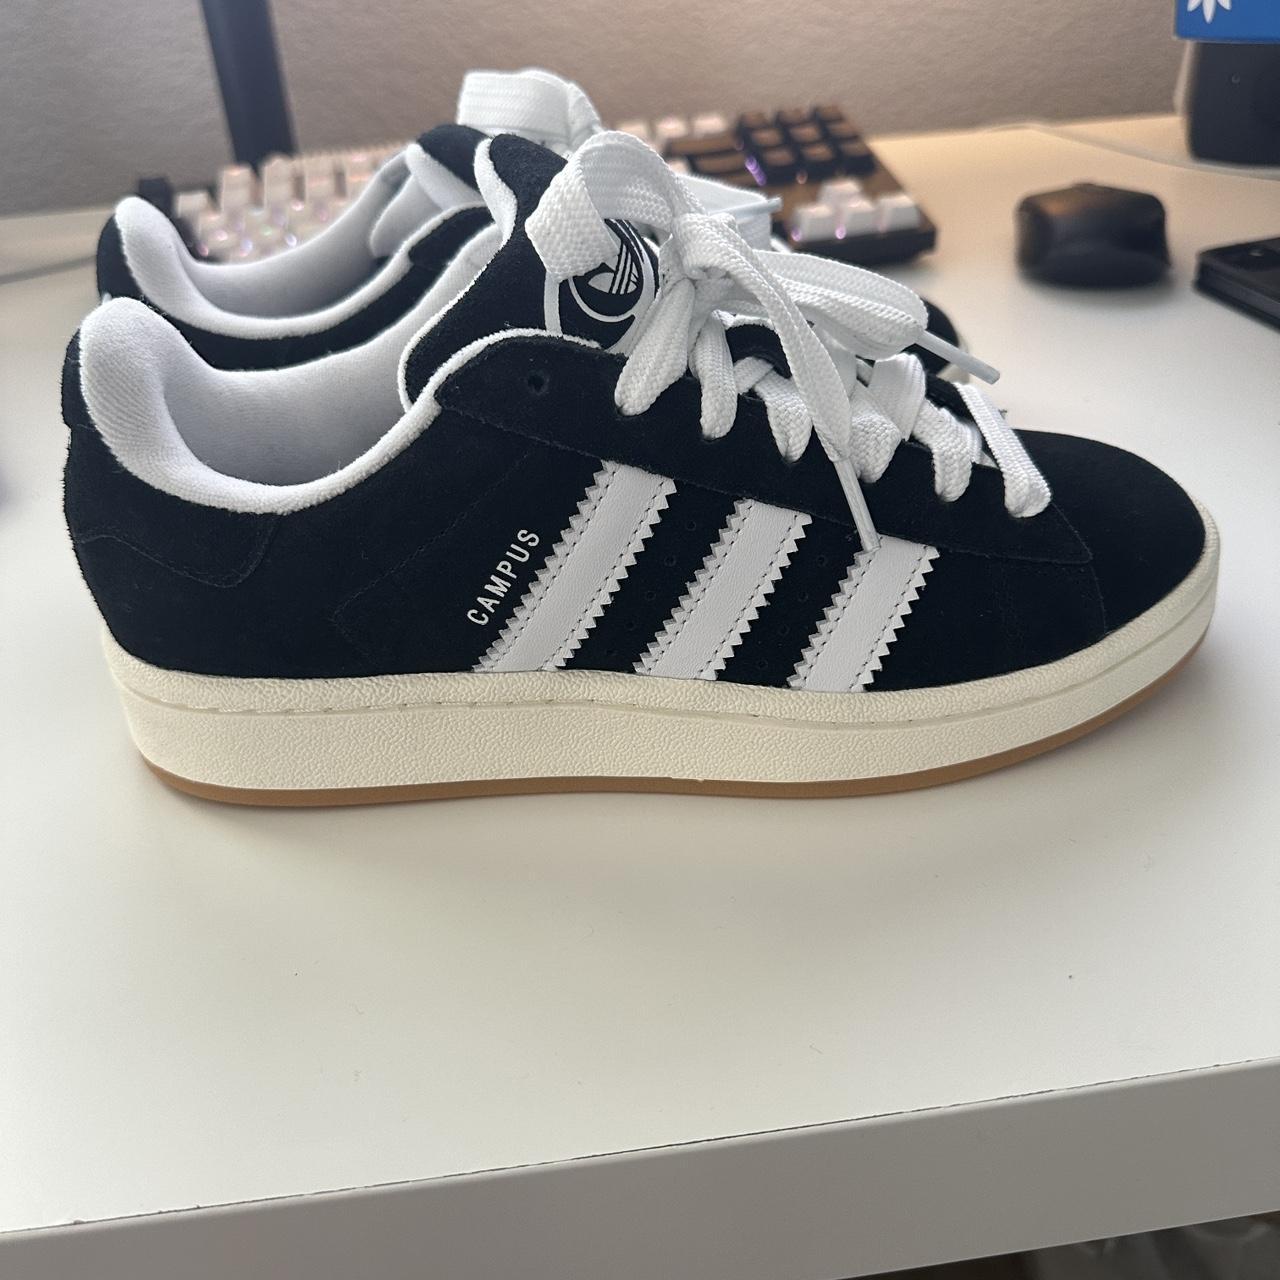 Adidas Campus 00s in Core Black Size: US M 5.5 = US... - Depop